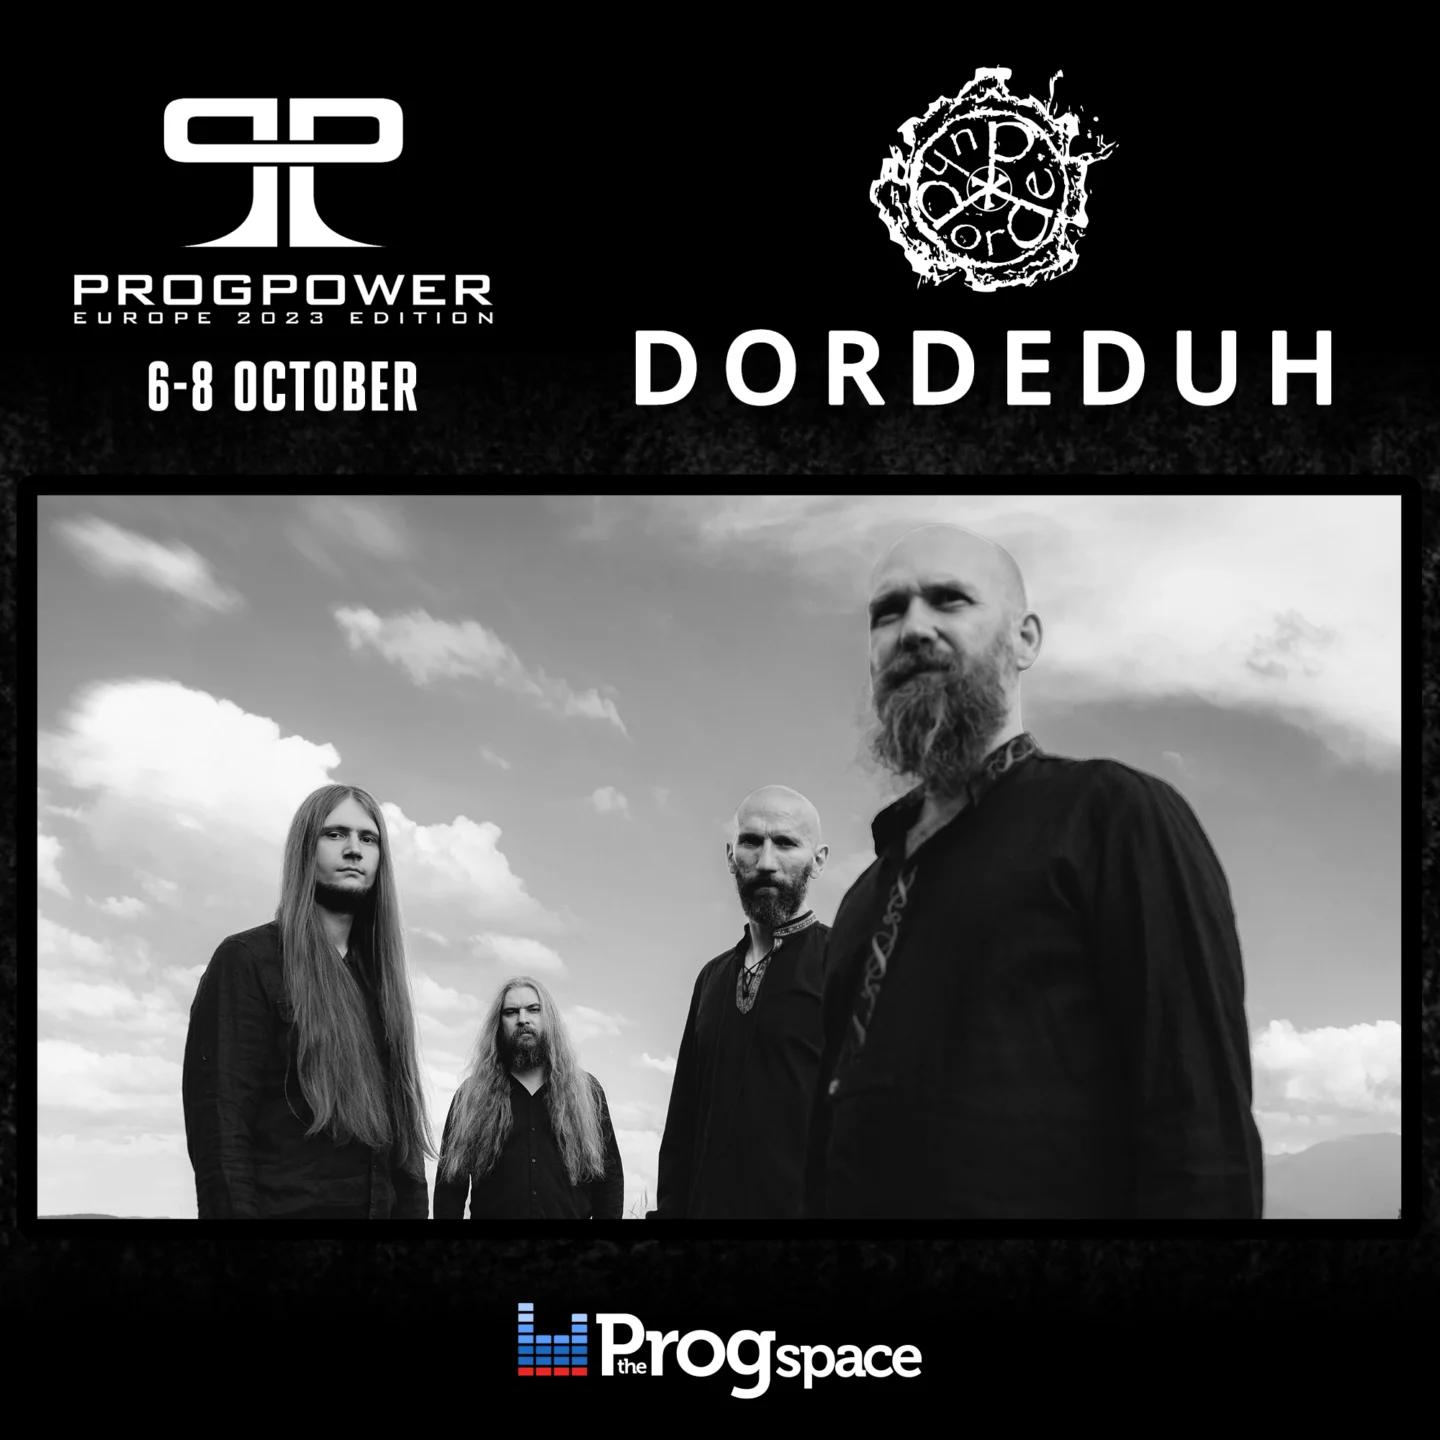 The 12th band to play at ProgPower Europe 2023 is Dordeduh